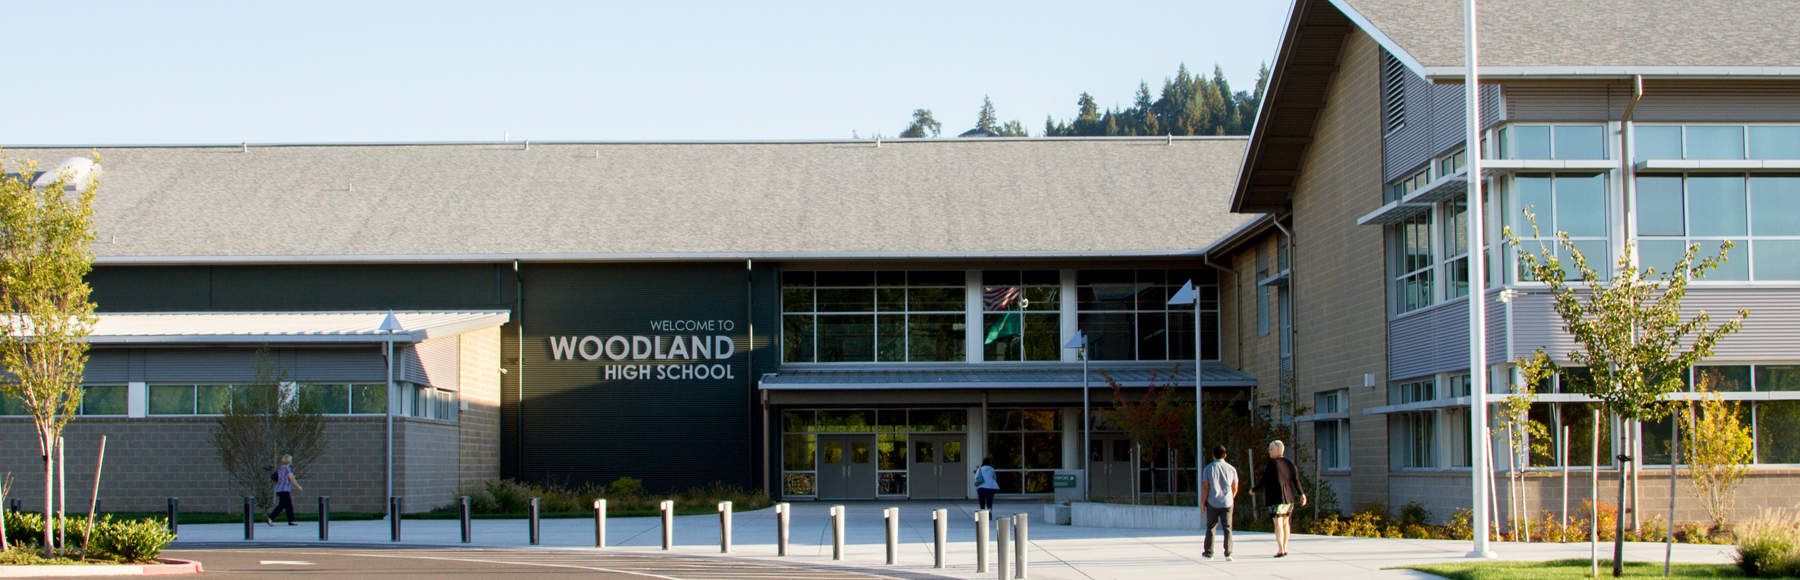 Woodland High School students can plan their academic career with the Course Planner website